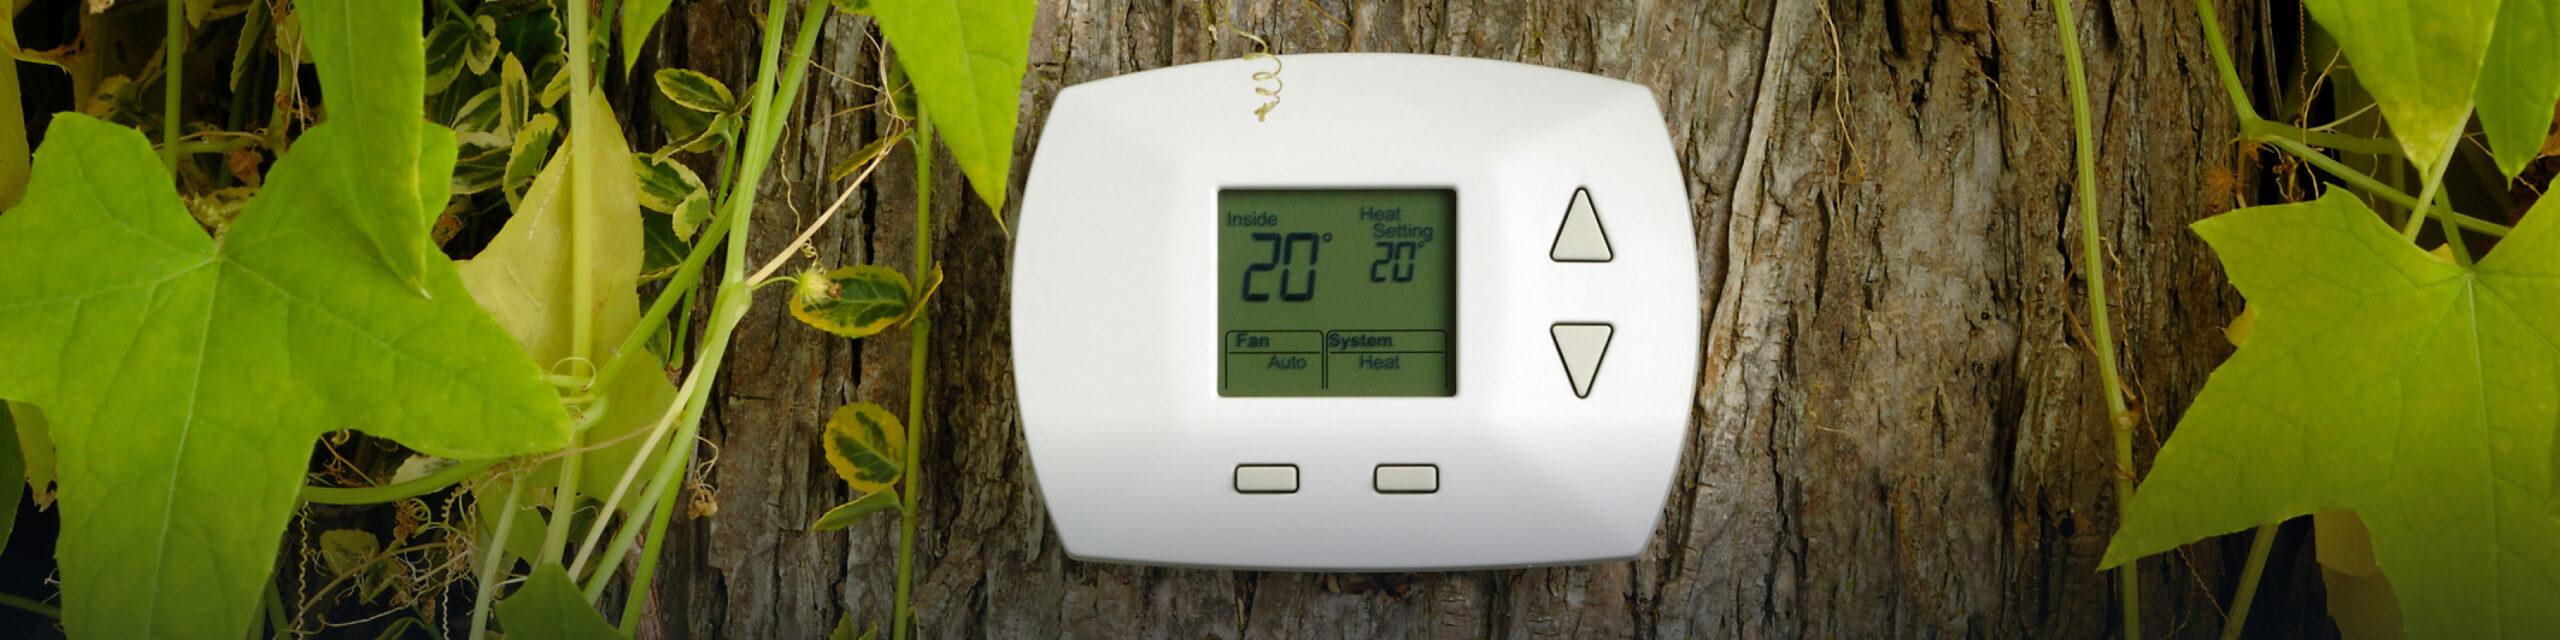 There is a white Trane thermostat posted on a dark tree trunk with green leaves.